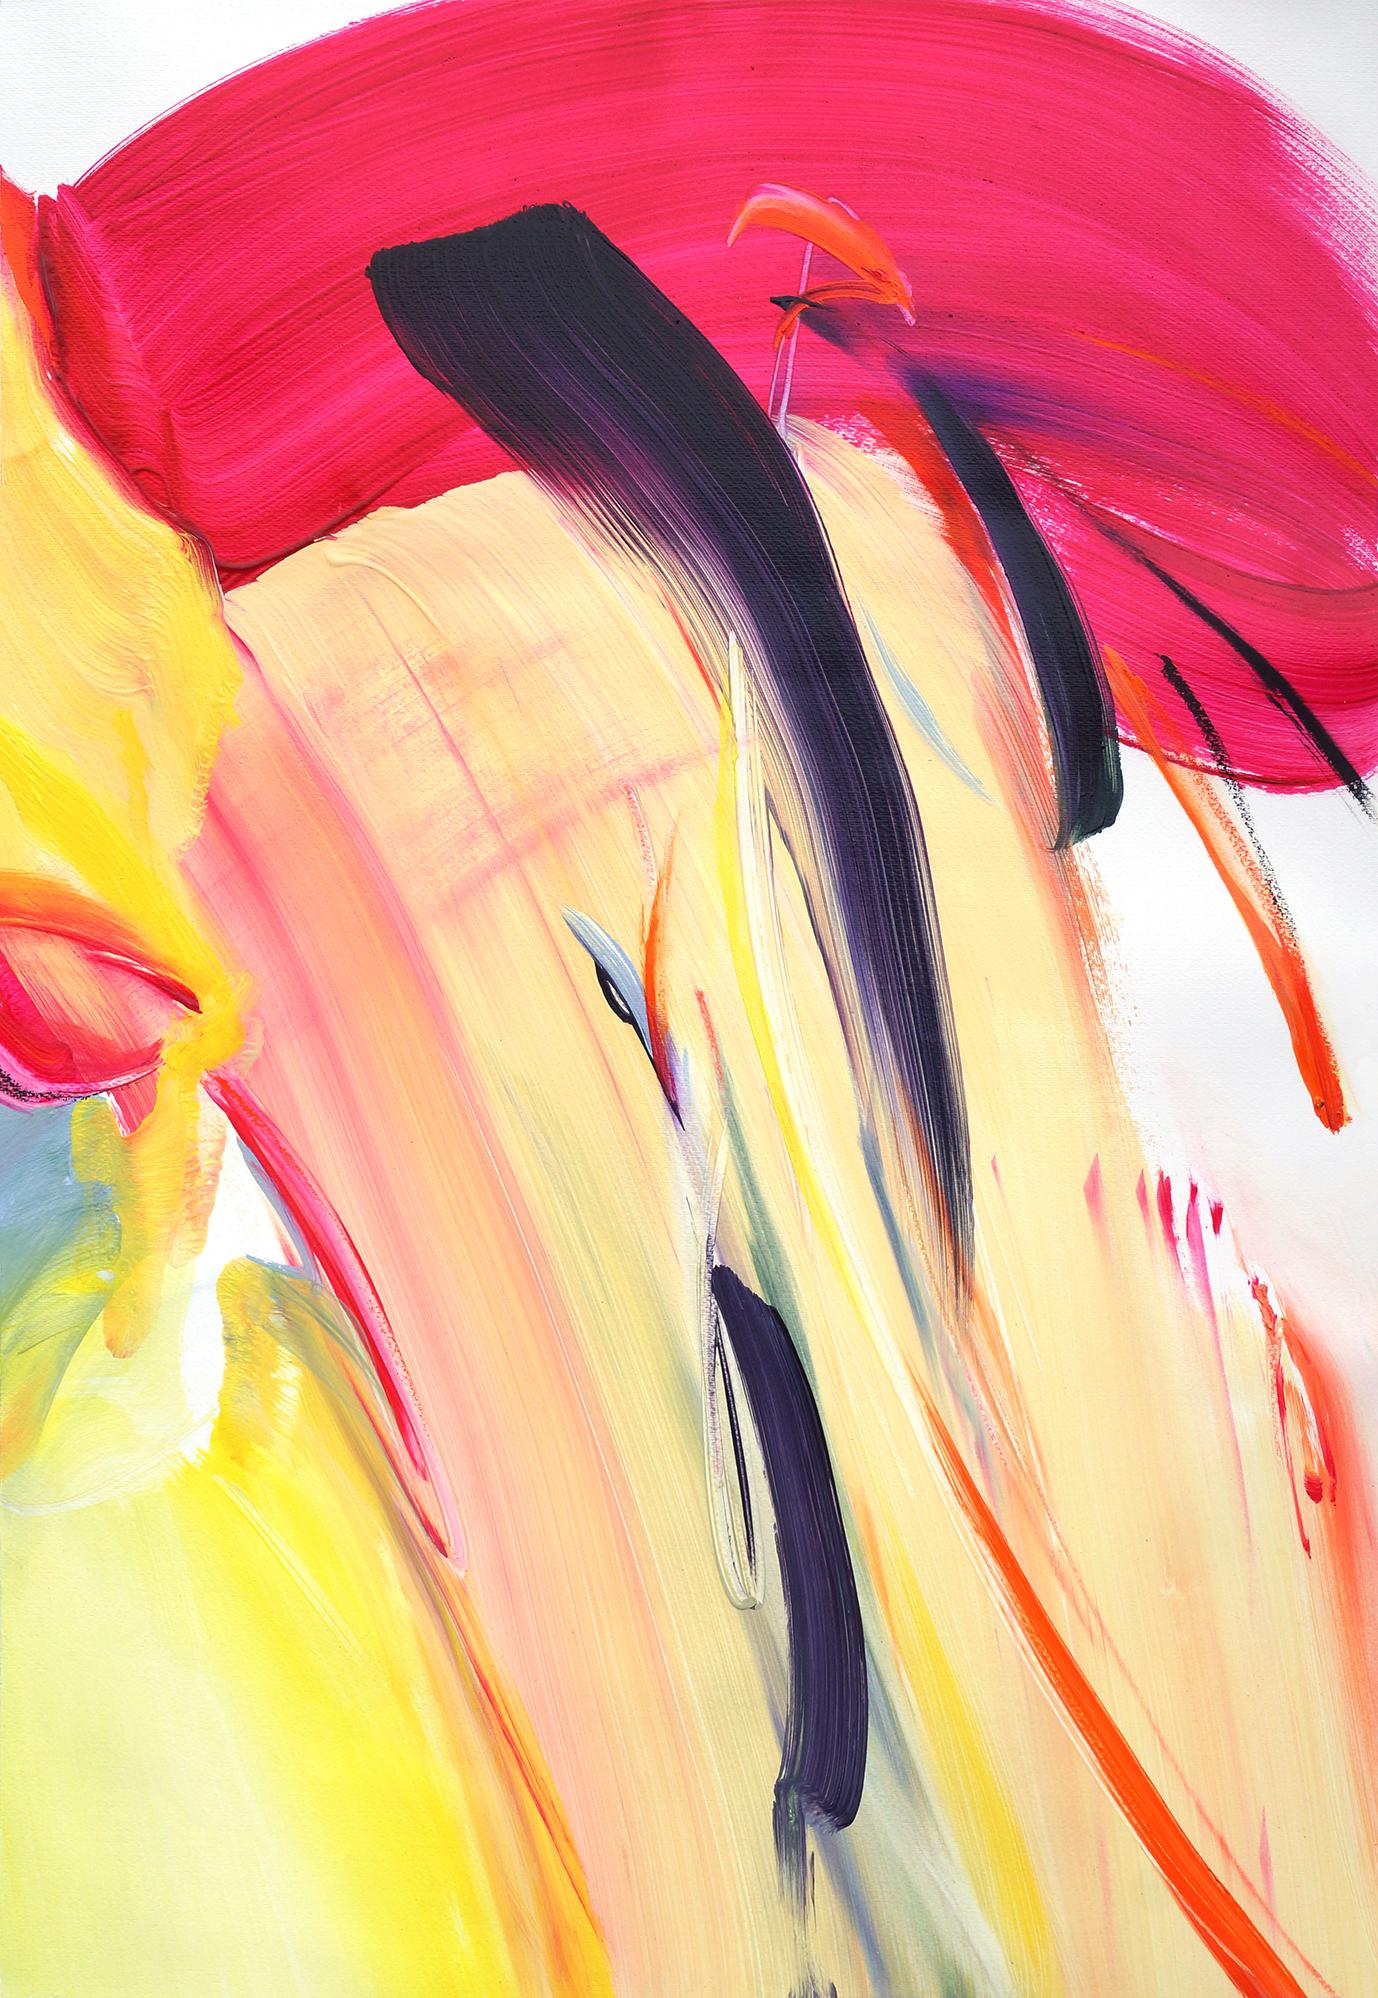 Hannah Shin  Abstract Drawing - Flow like a breeze #1, Oil on paper, 100 x 70cm, 2021